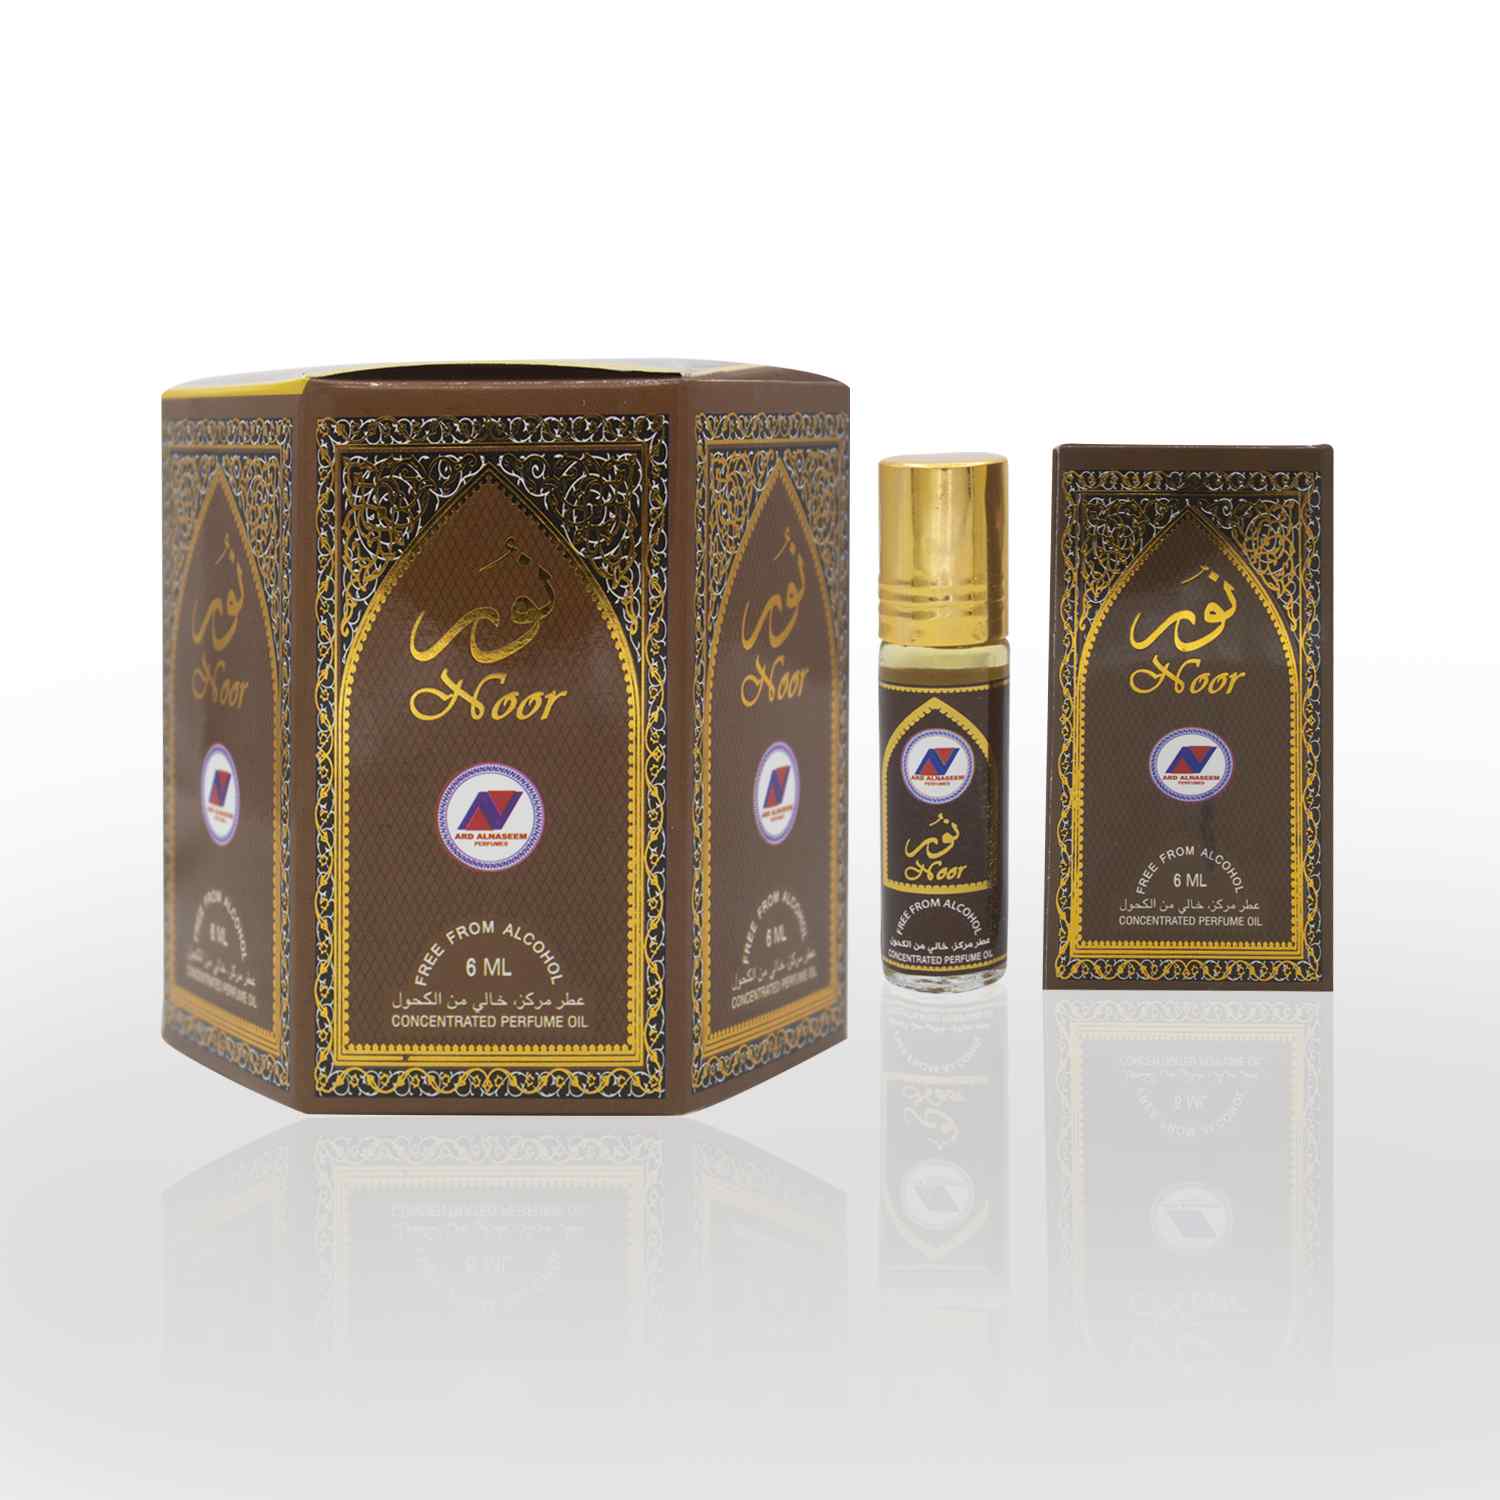 Noor 6ml Attar is a concentered perfume oil, free from Alcohol. It is a product of ARD perfumes. Made in UAE